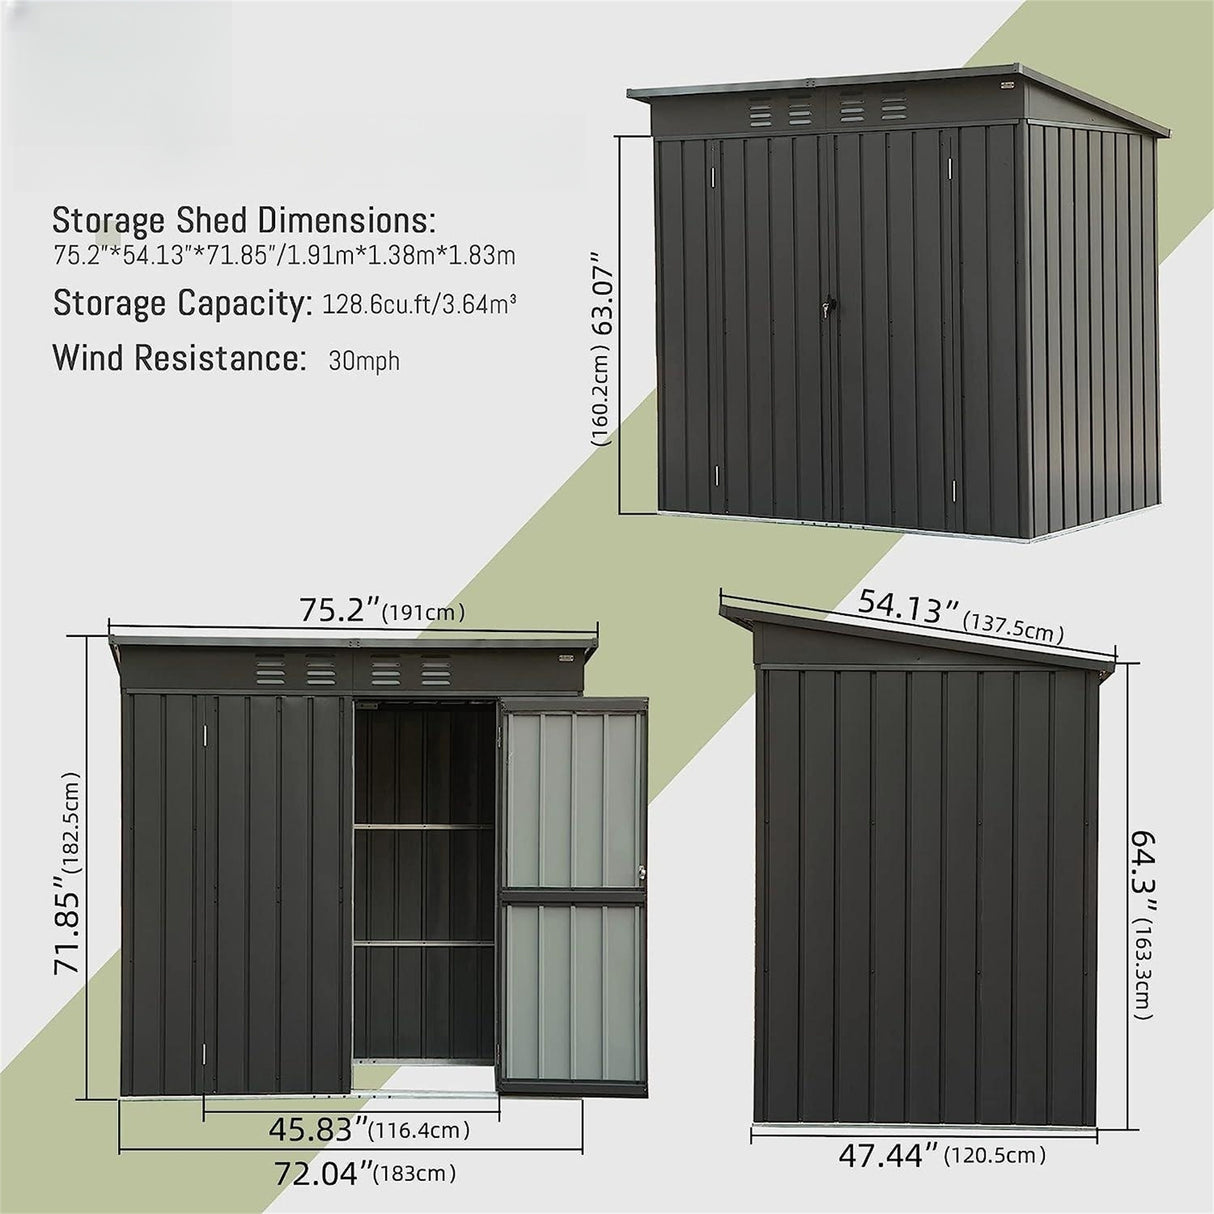 Backyard Storage Shed with Sloping Roof Galvanized Steel Frame Outdoor Garden Shed Metal Utility Tool Storage Room with Latches and Lockable Door (6.27x4.51ft, Black)